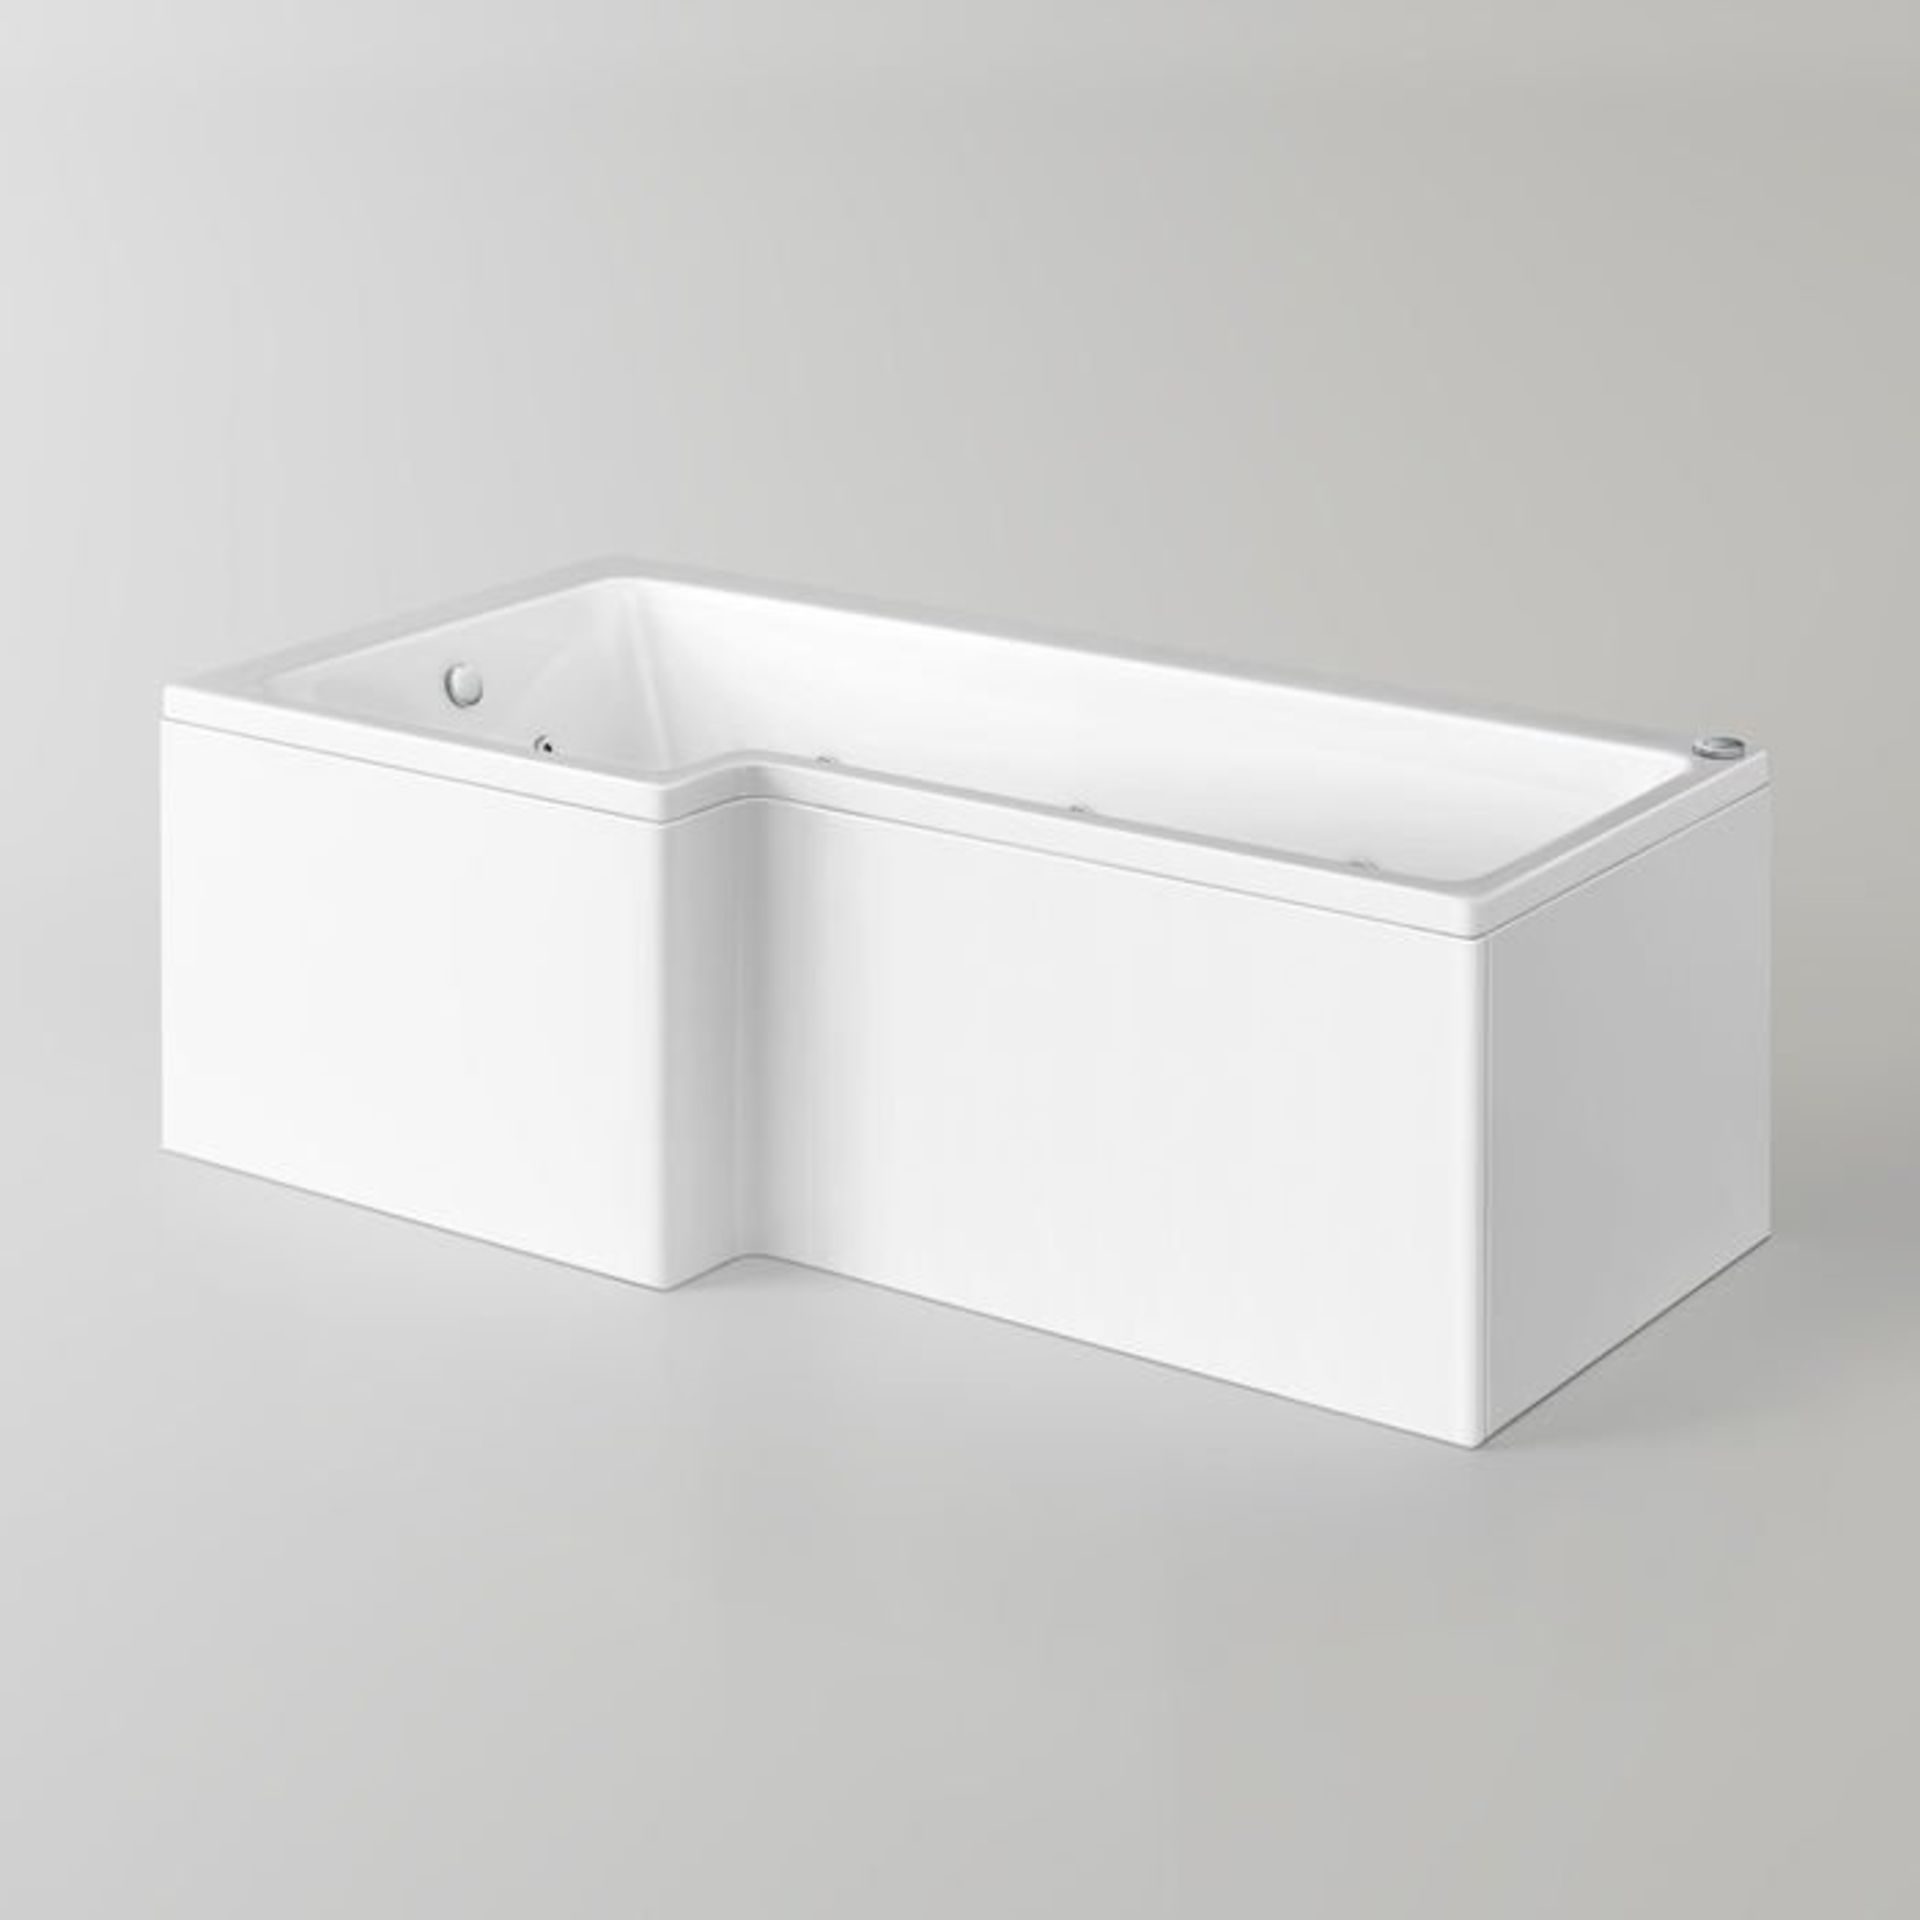 (G70) 1700x700x510mm Whirlpool Left Hand L Shaped Bath - 14 Jets. Indulge in luxury for a truly - Image 4 of 4